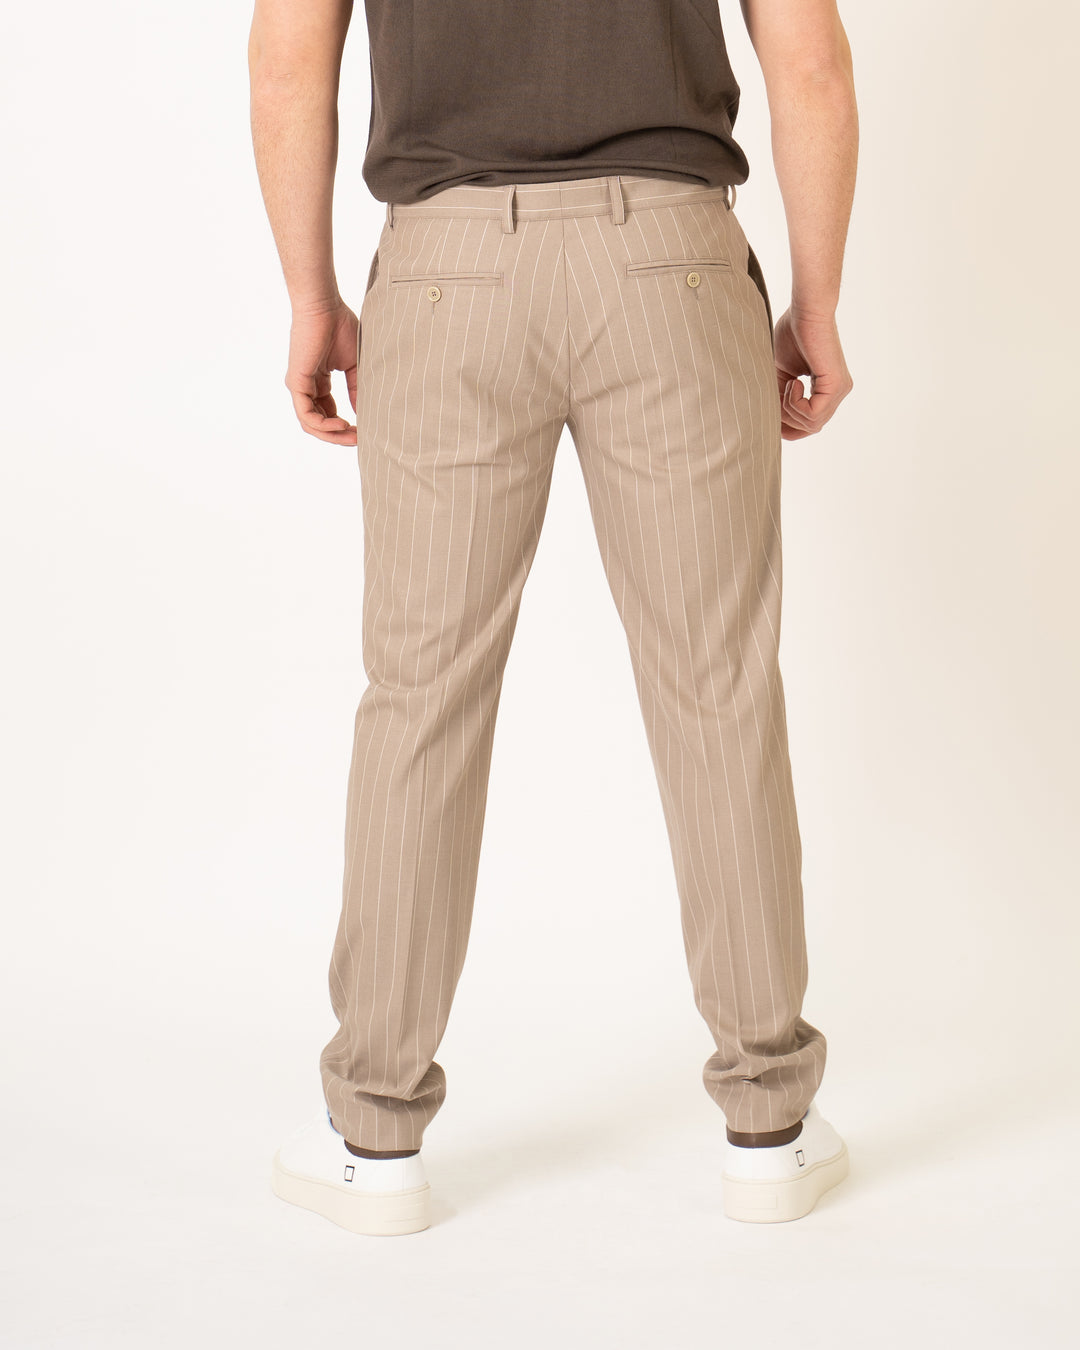 Beige pinstriped trousers